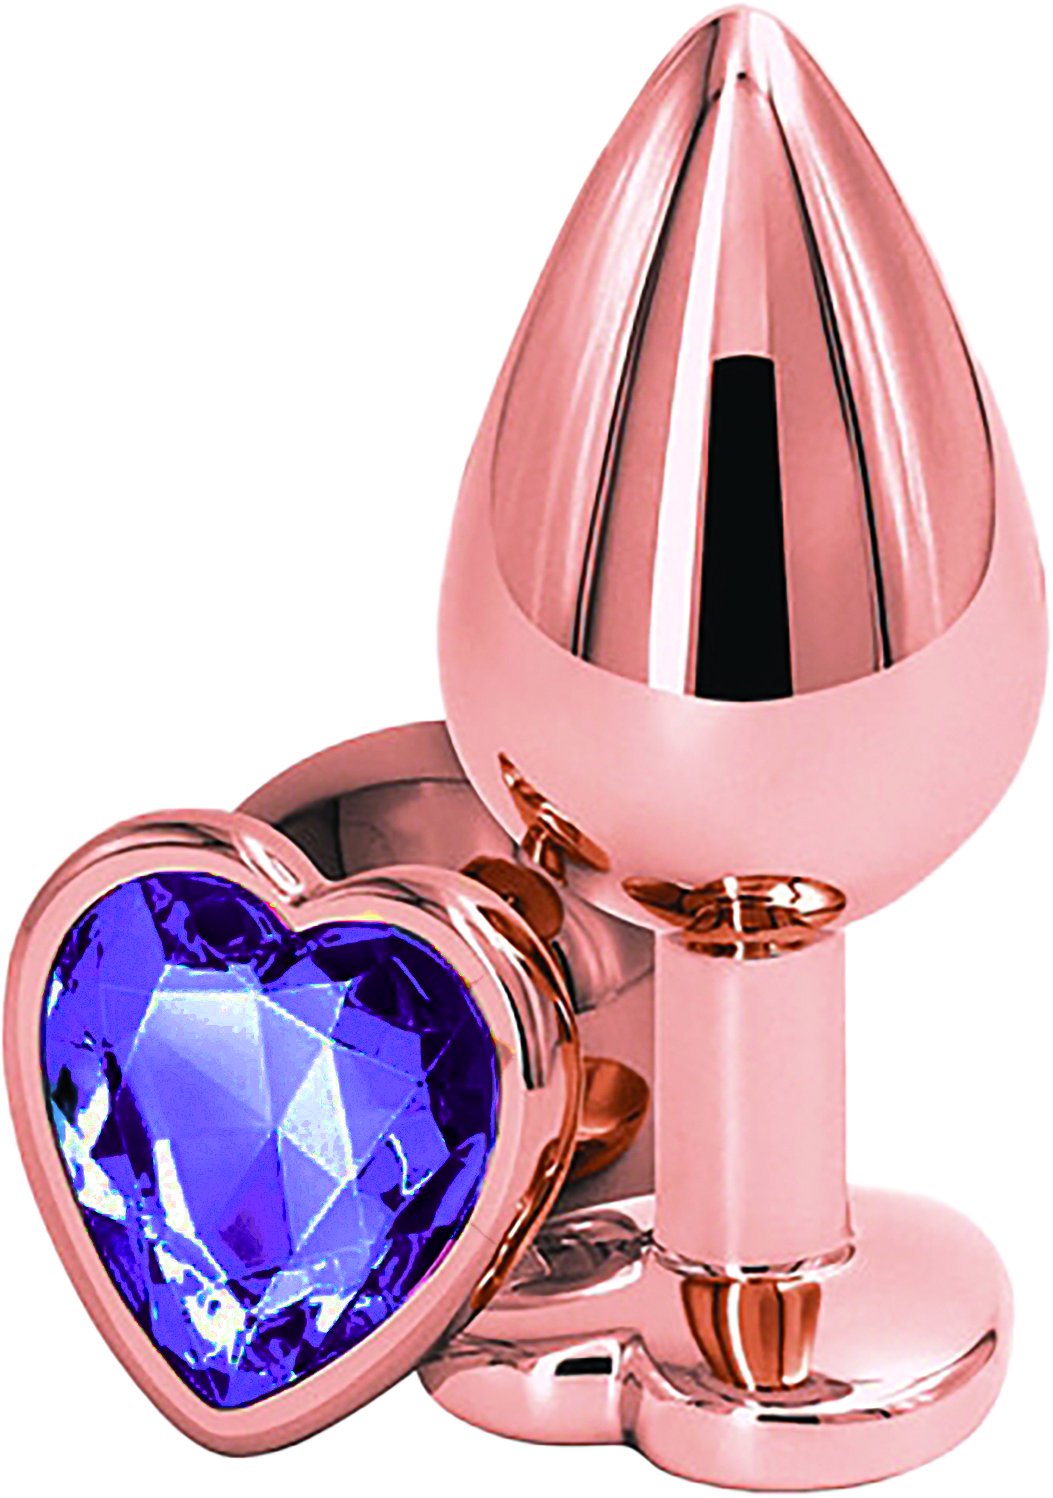 Dop Anal Brilliant Anal Plug Small, Rose Gold, Piatra Mov, Passion Labs